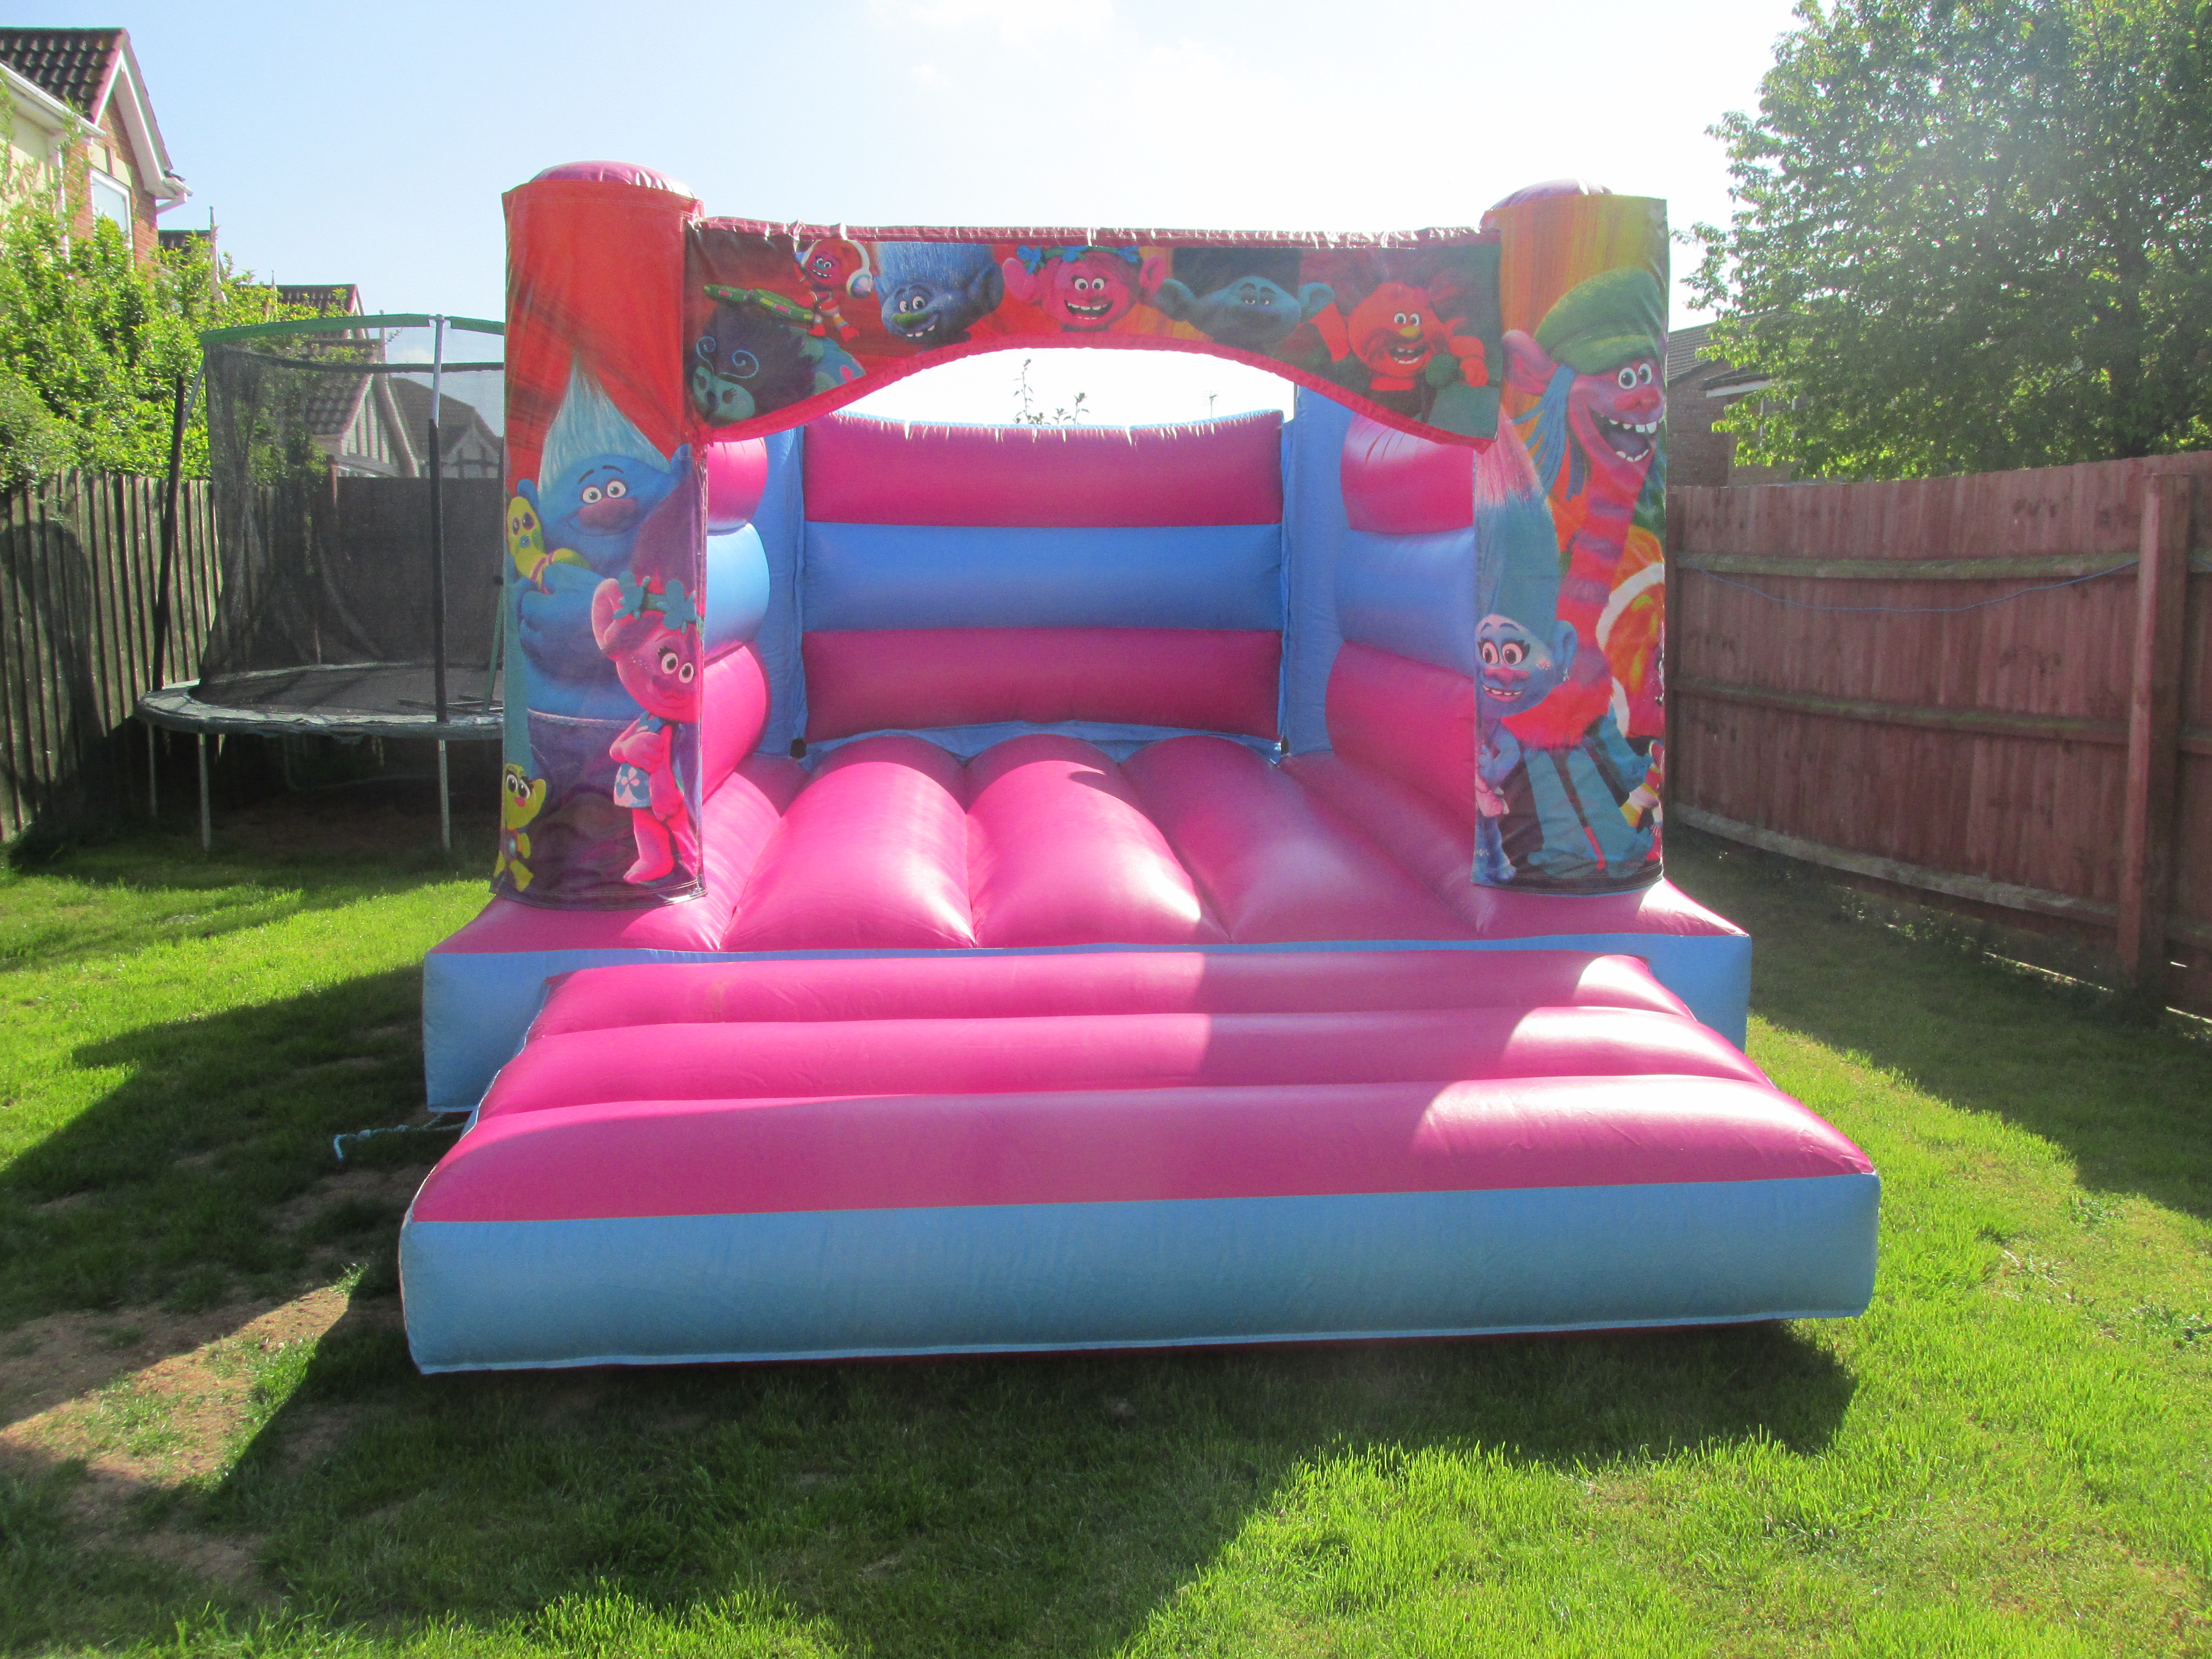 Pretty Pink Trolls Bouncy Castle Hire In Peterborough, Bourne, Spalding and Grantham.